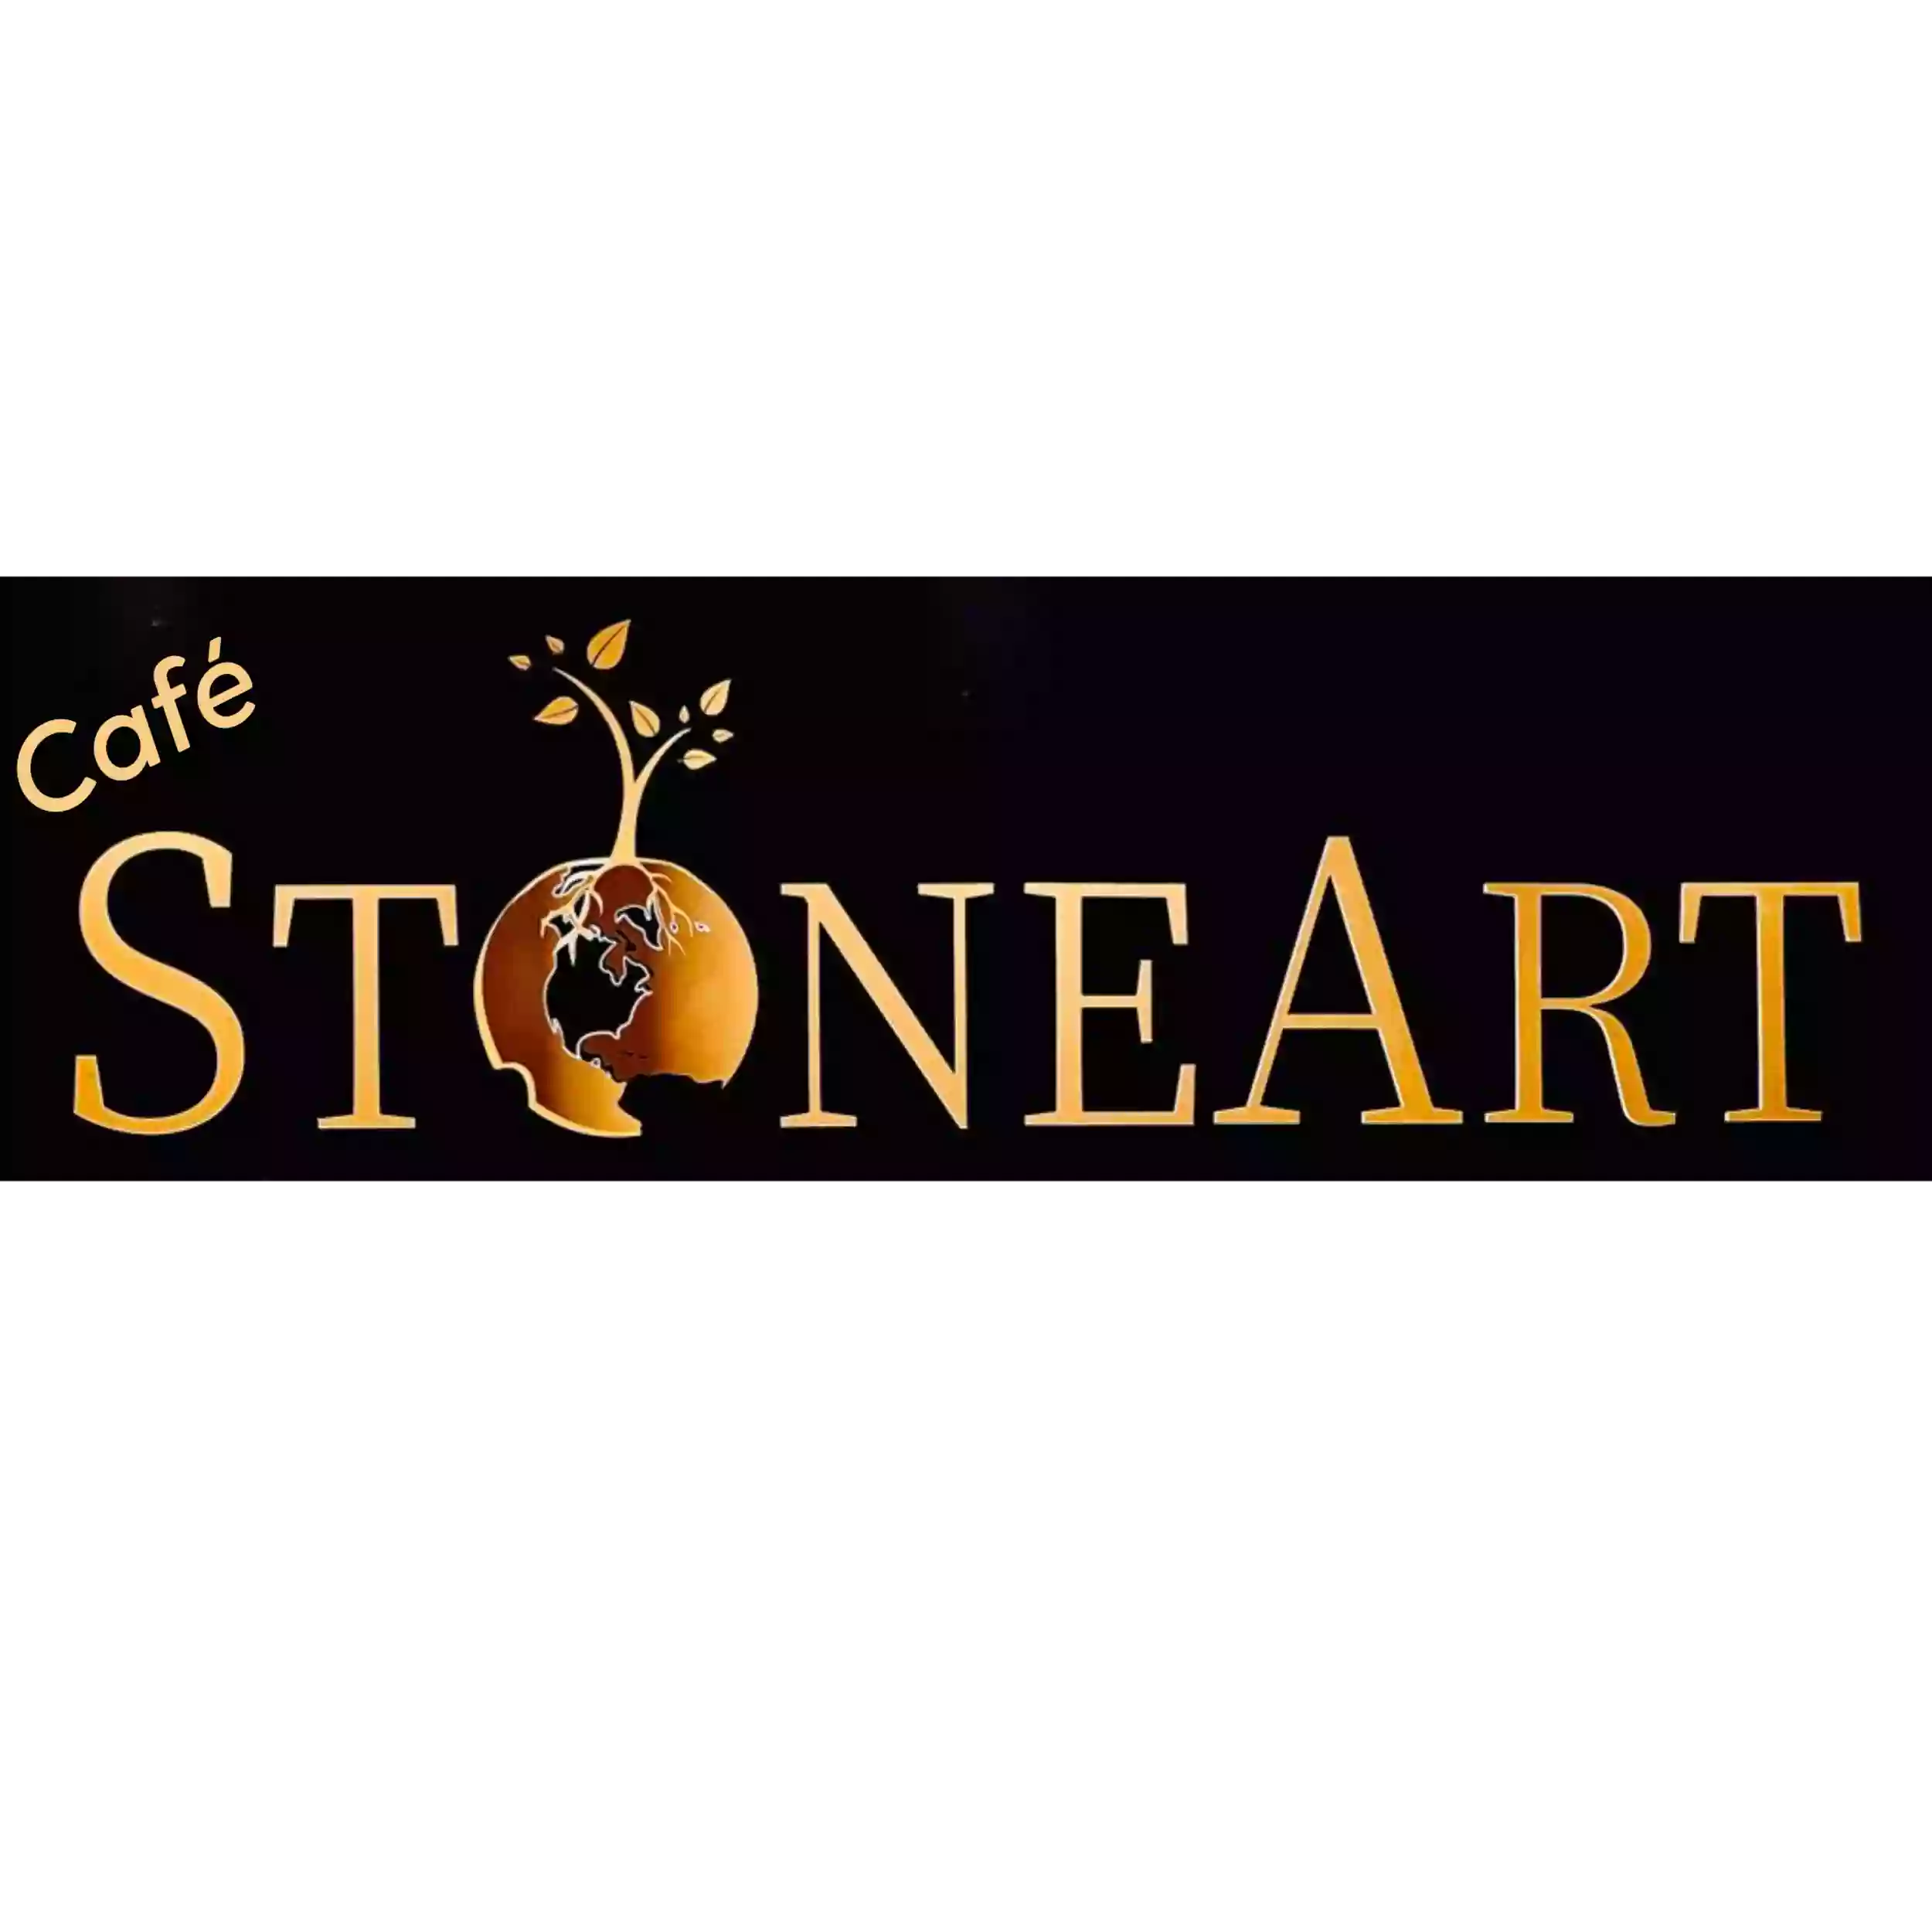 Cafe StoneArt